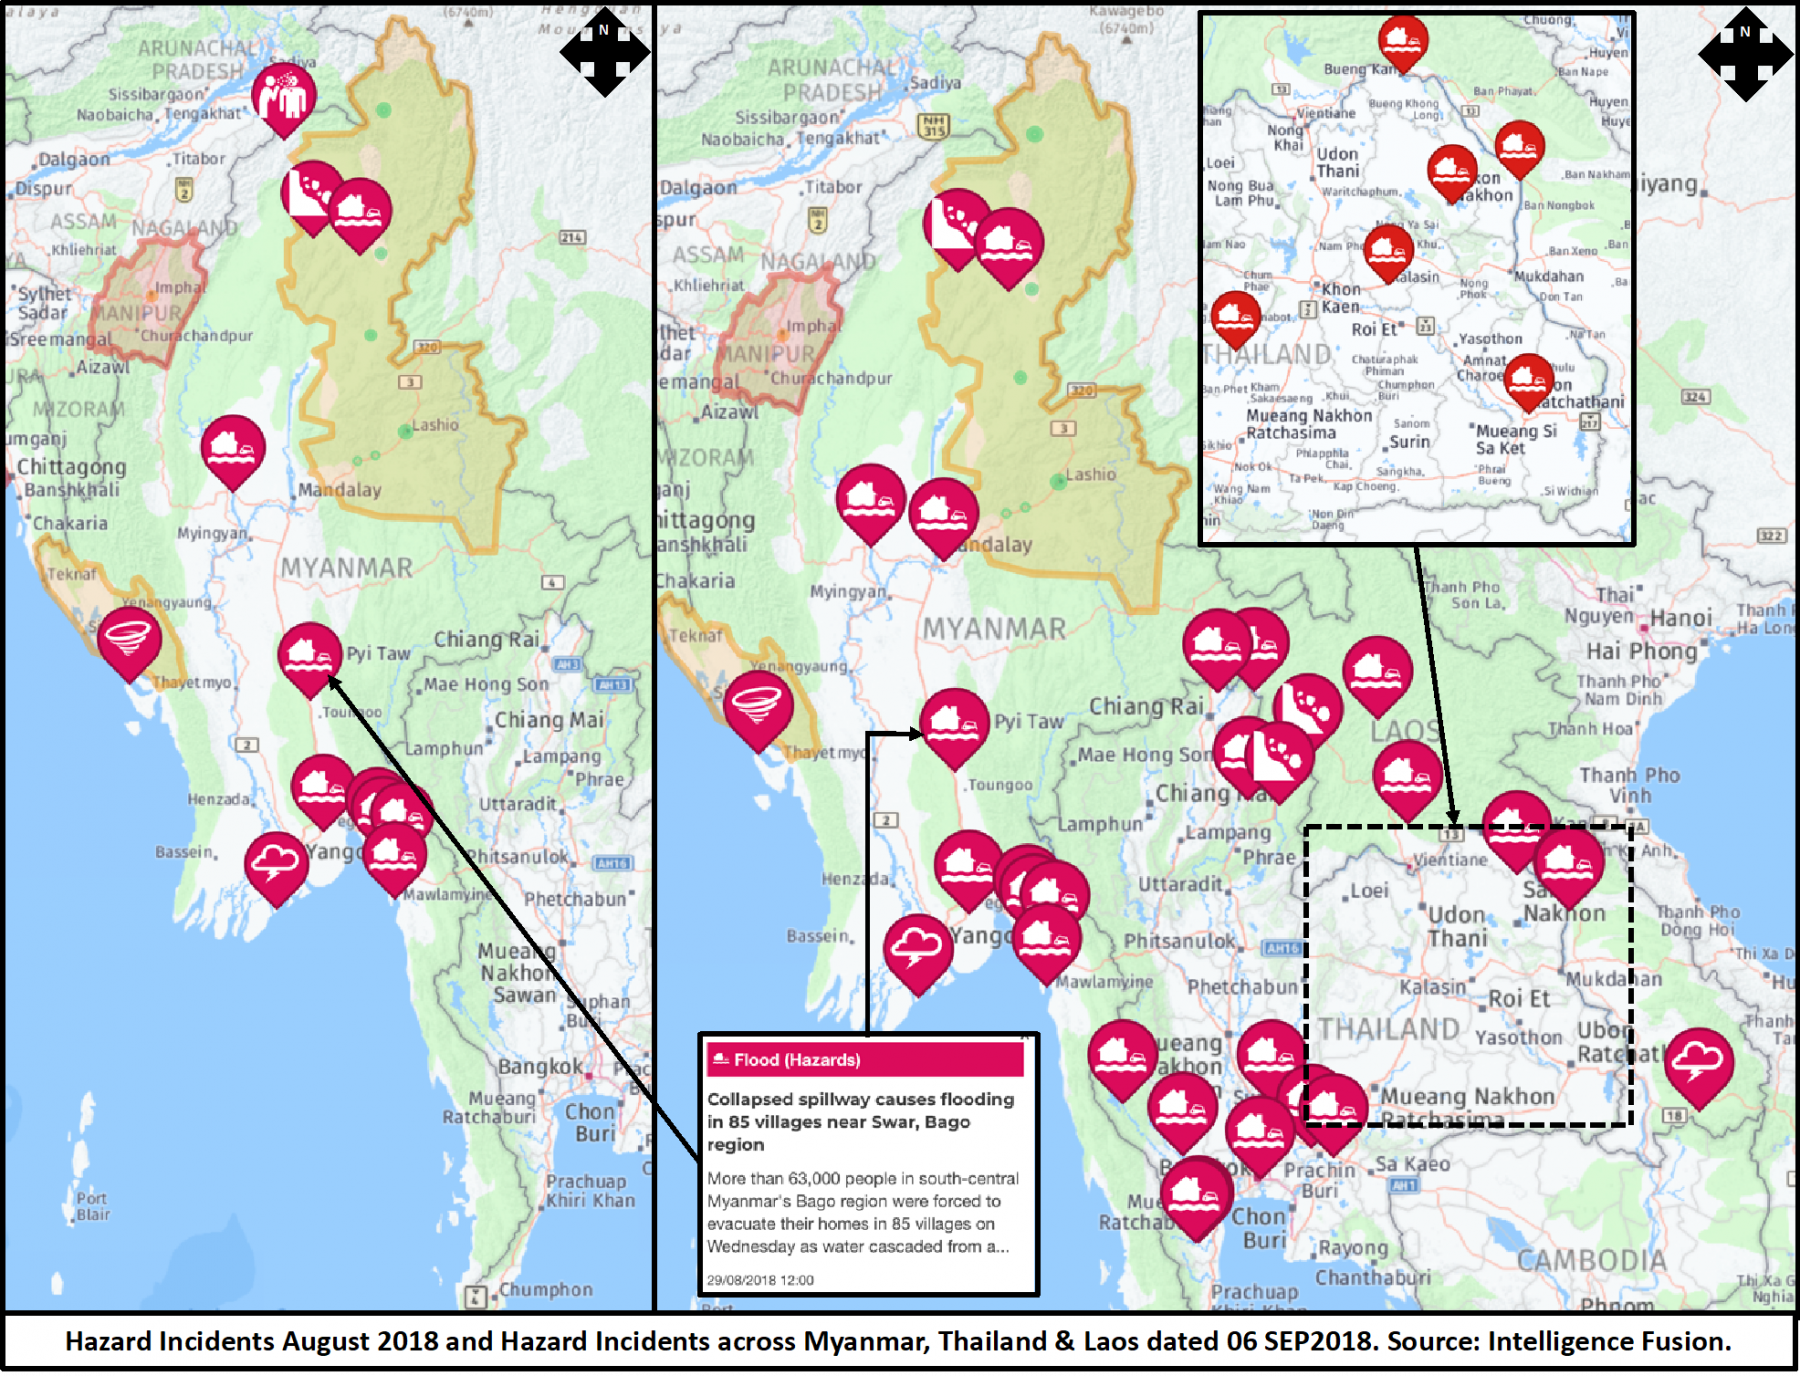 Hazard related threats caused by severe weather conditions in Myanmar during September 2018